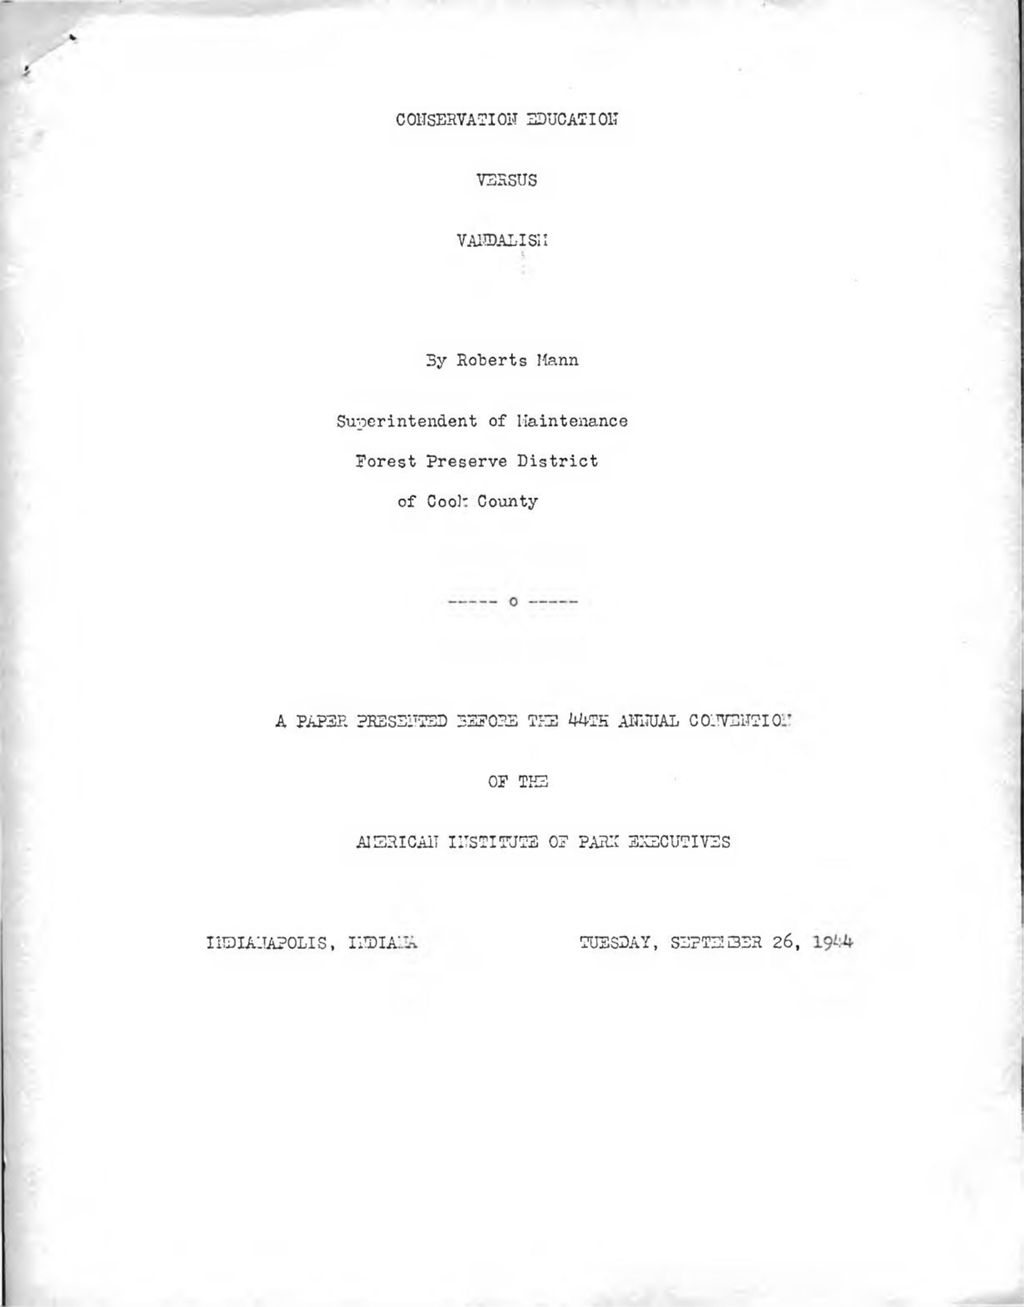 Paper on conservation education vs. vandalism, by Roberts Mann, 1944